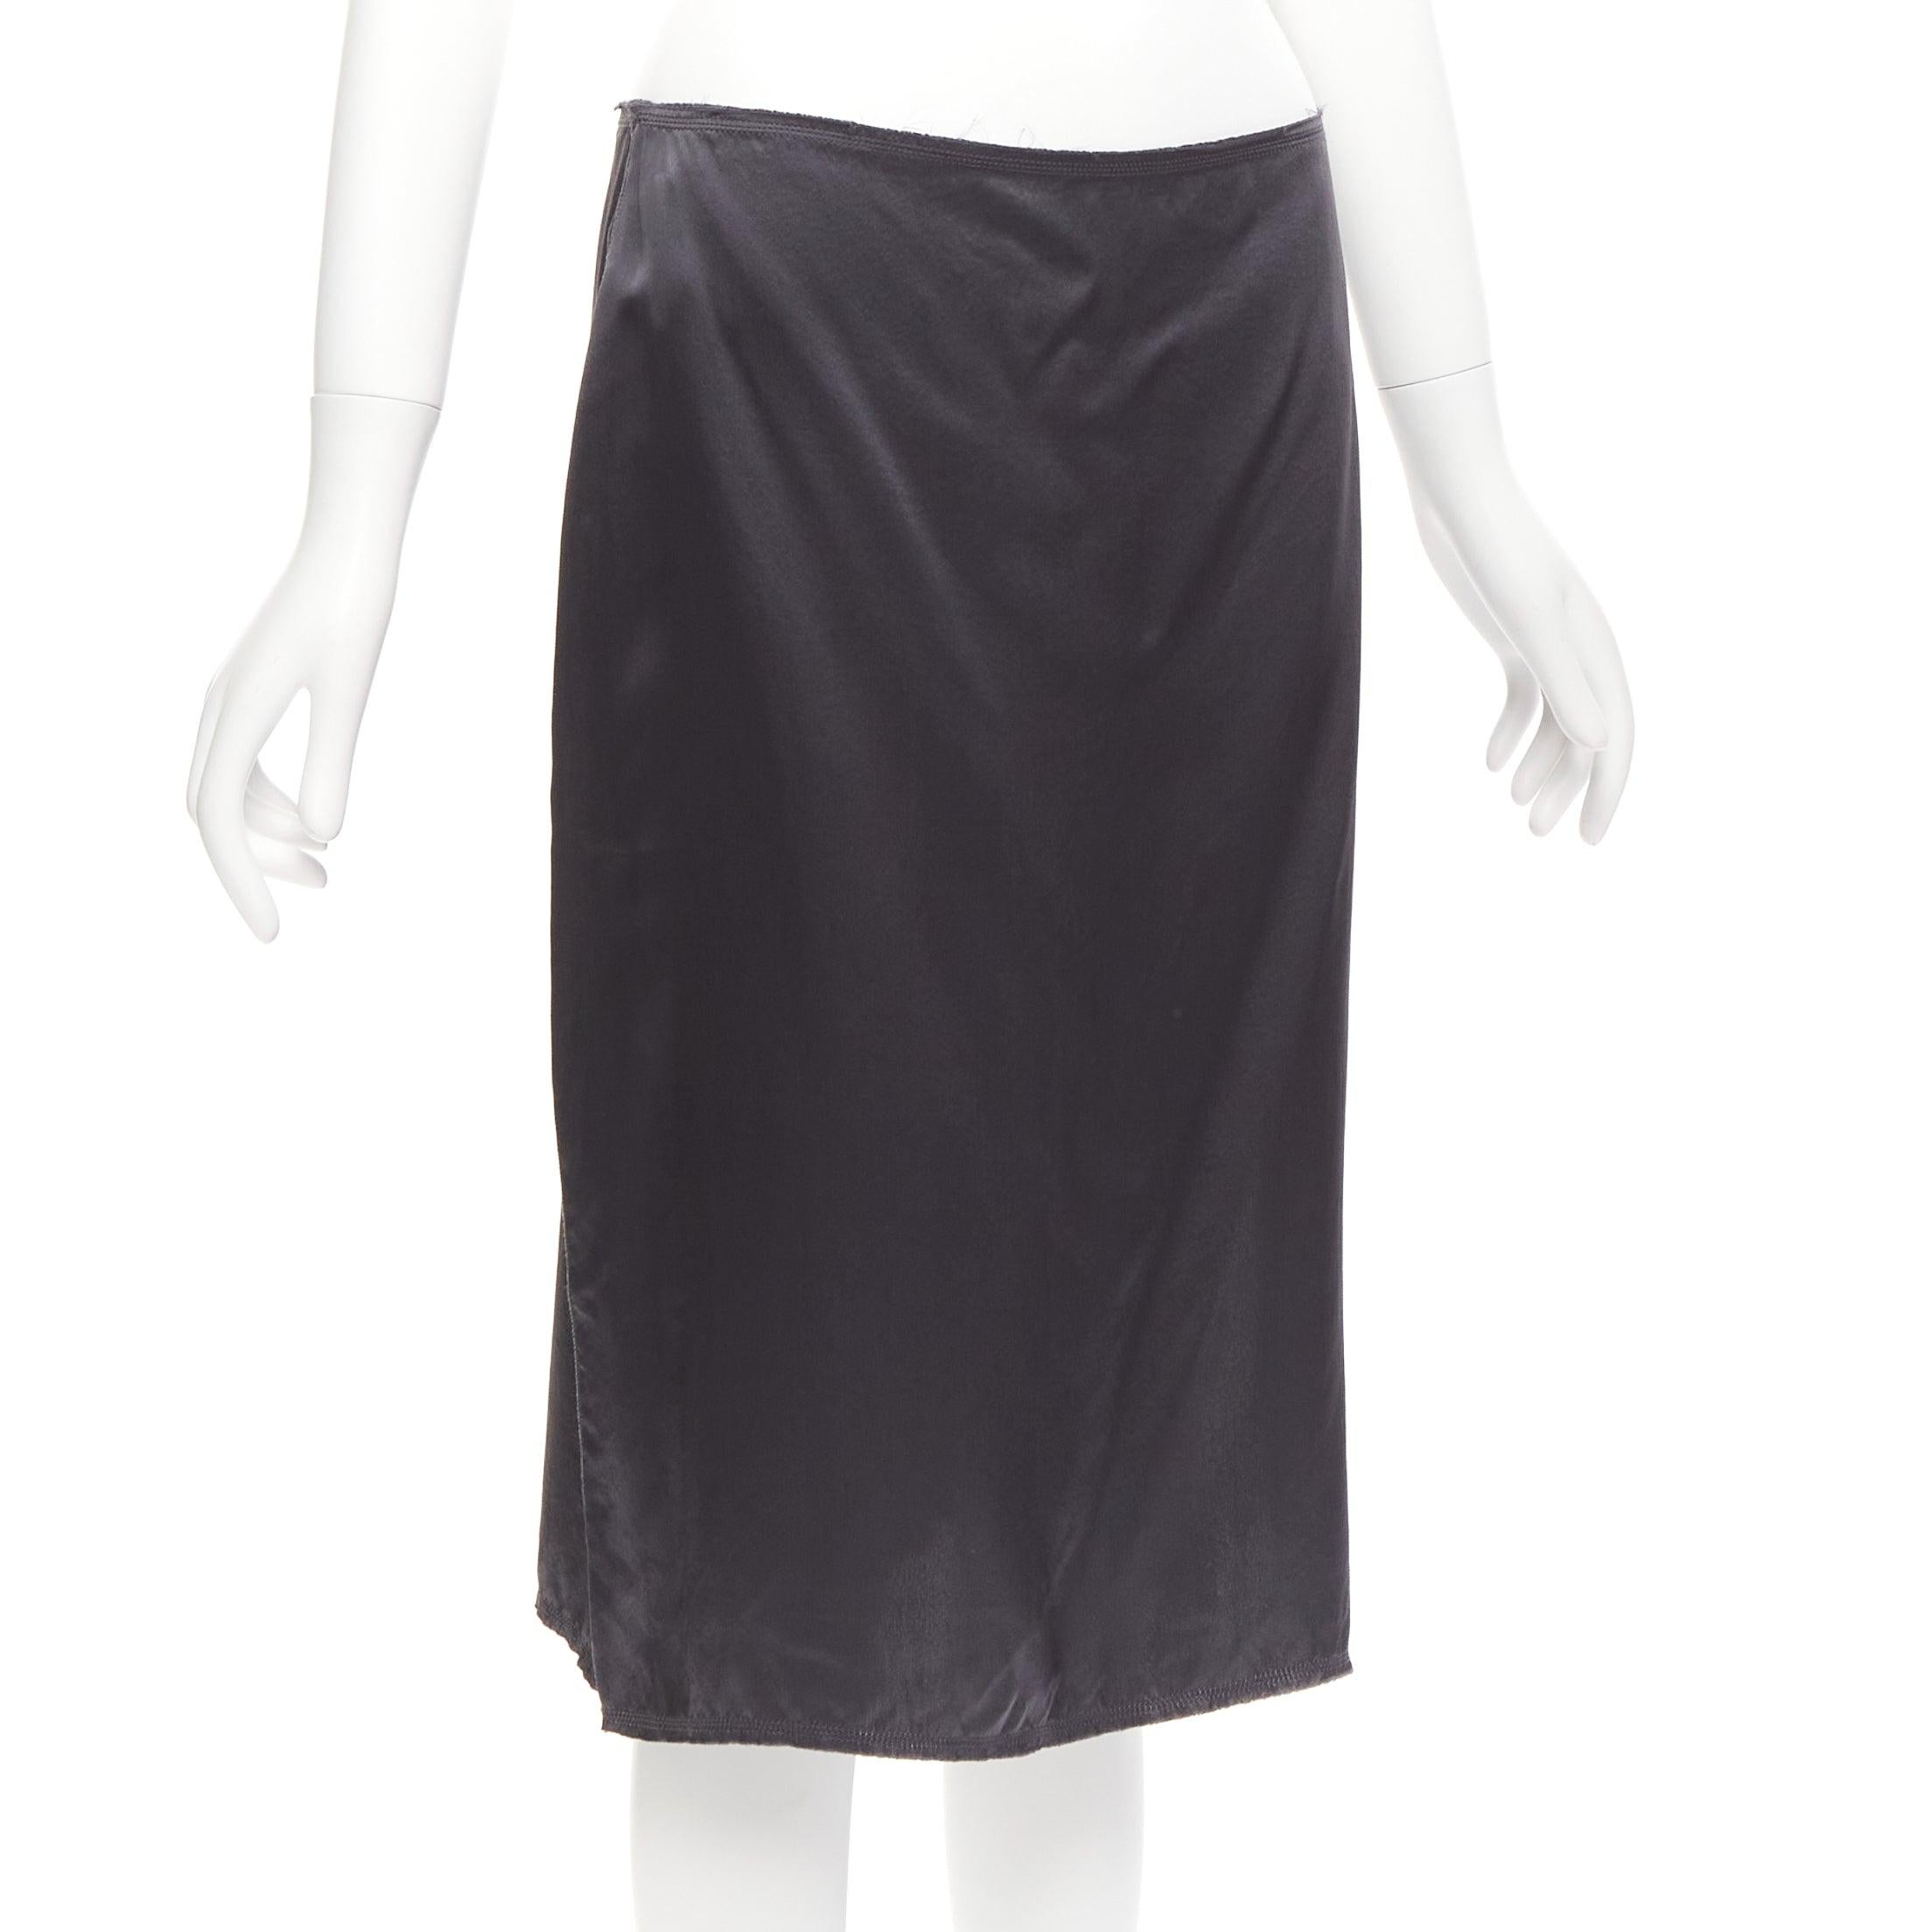 LANVIN 2004 100% silk grey raw edge fabric button low waist midi skirt FR38 M
Reference: CELG/A00265
Brand: Lanvin
Designer: Alber Elbaz
Collection: 2004
Material: Silk
Color: Grey
Pattern: Solid
Closure: Button
Extra Details: Side slit and side